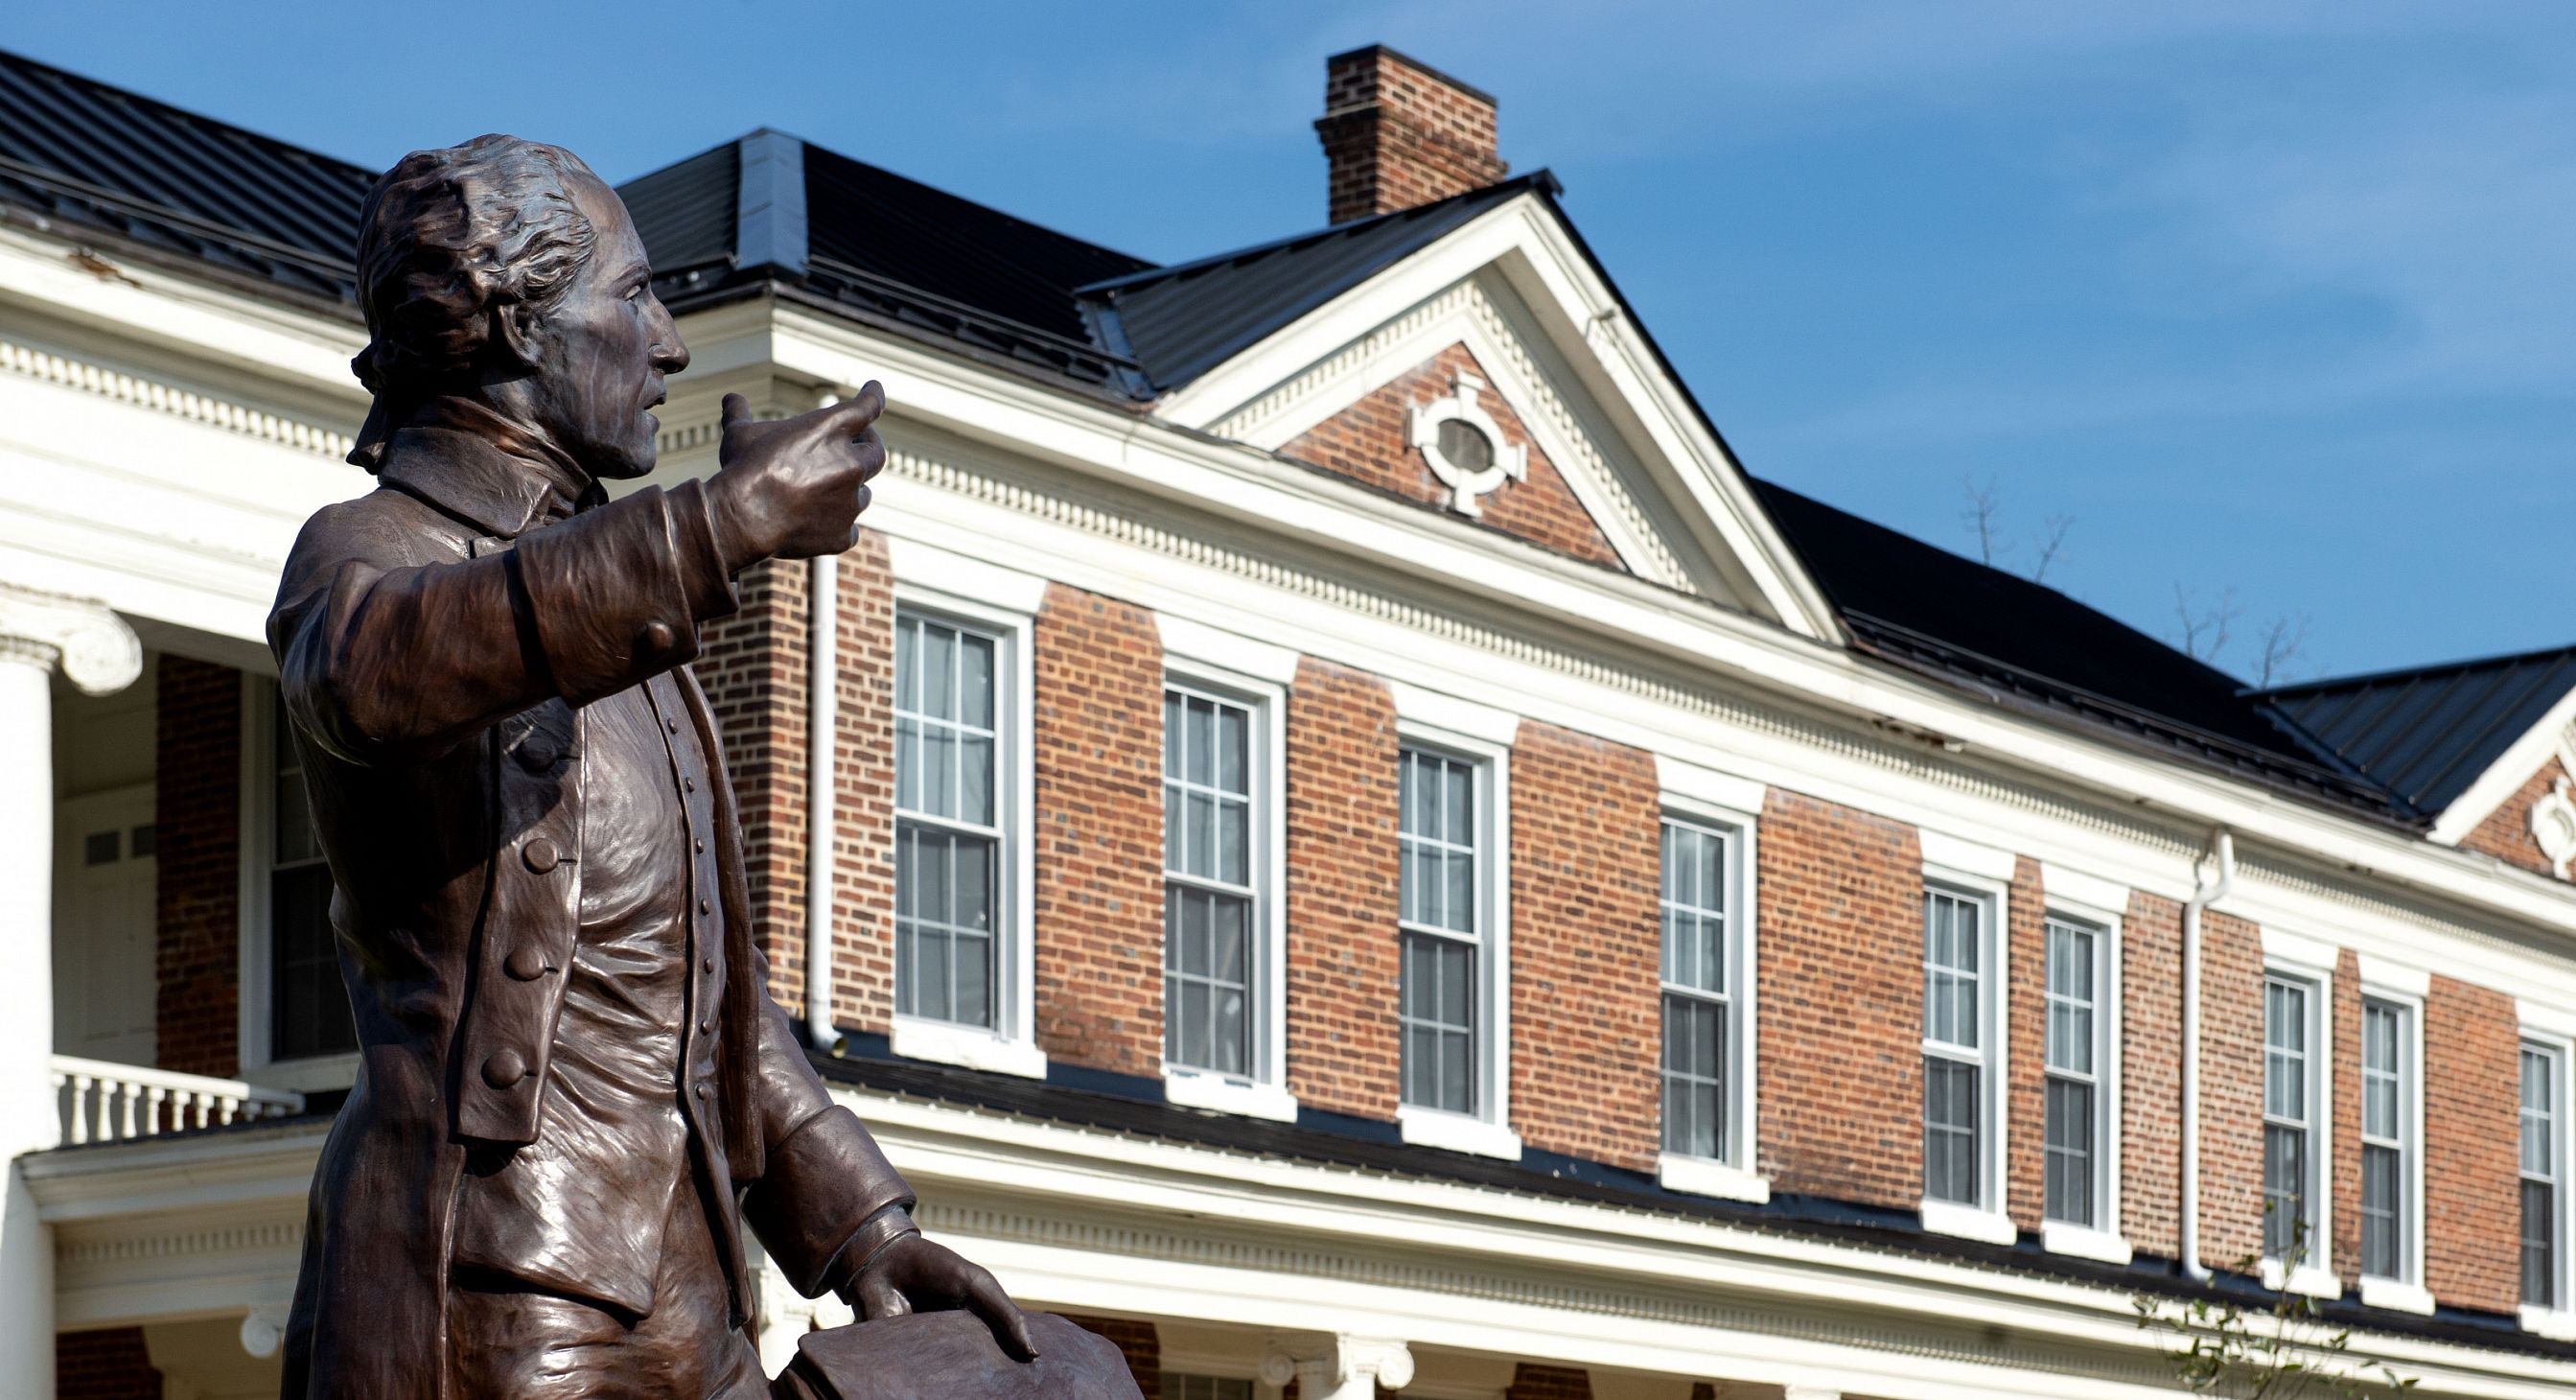 Patrick Henry Statue and Carriger Hall at Emory & Henry College